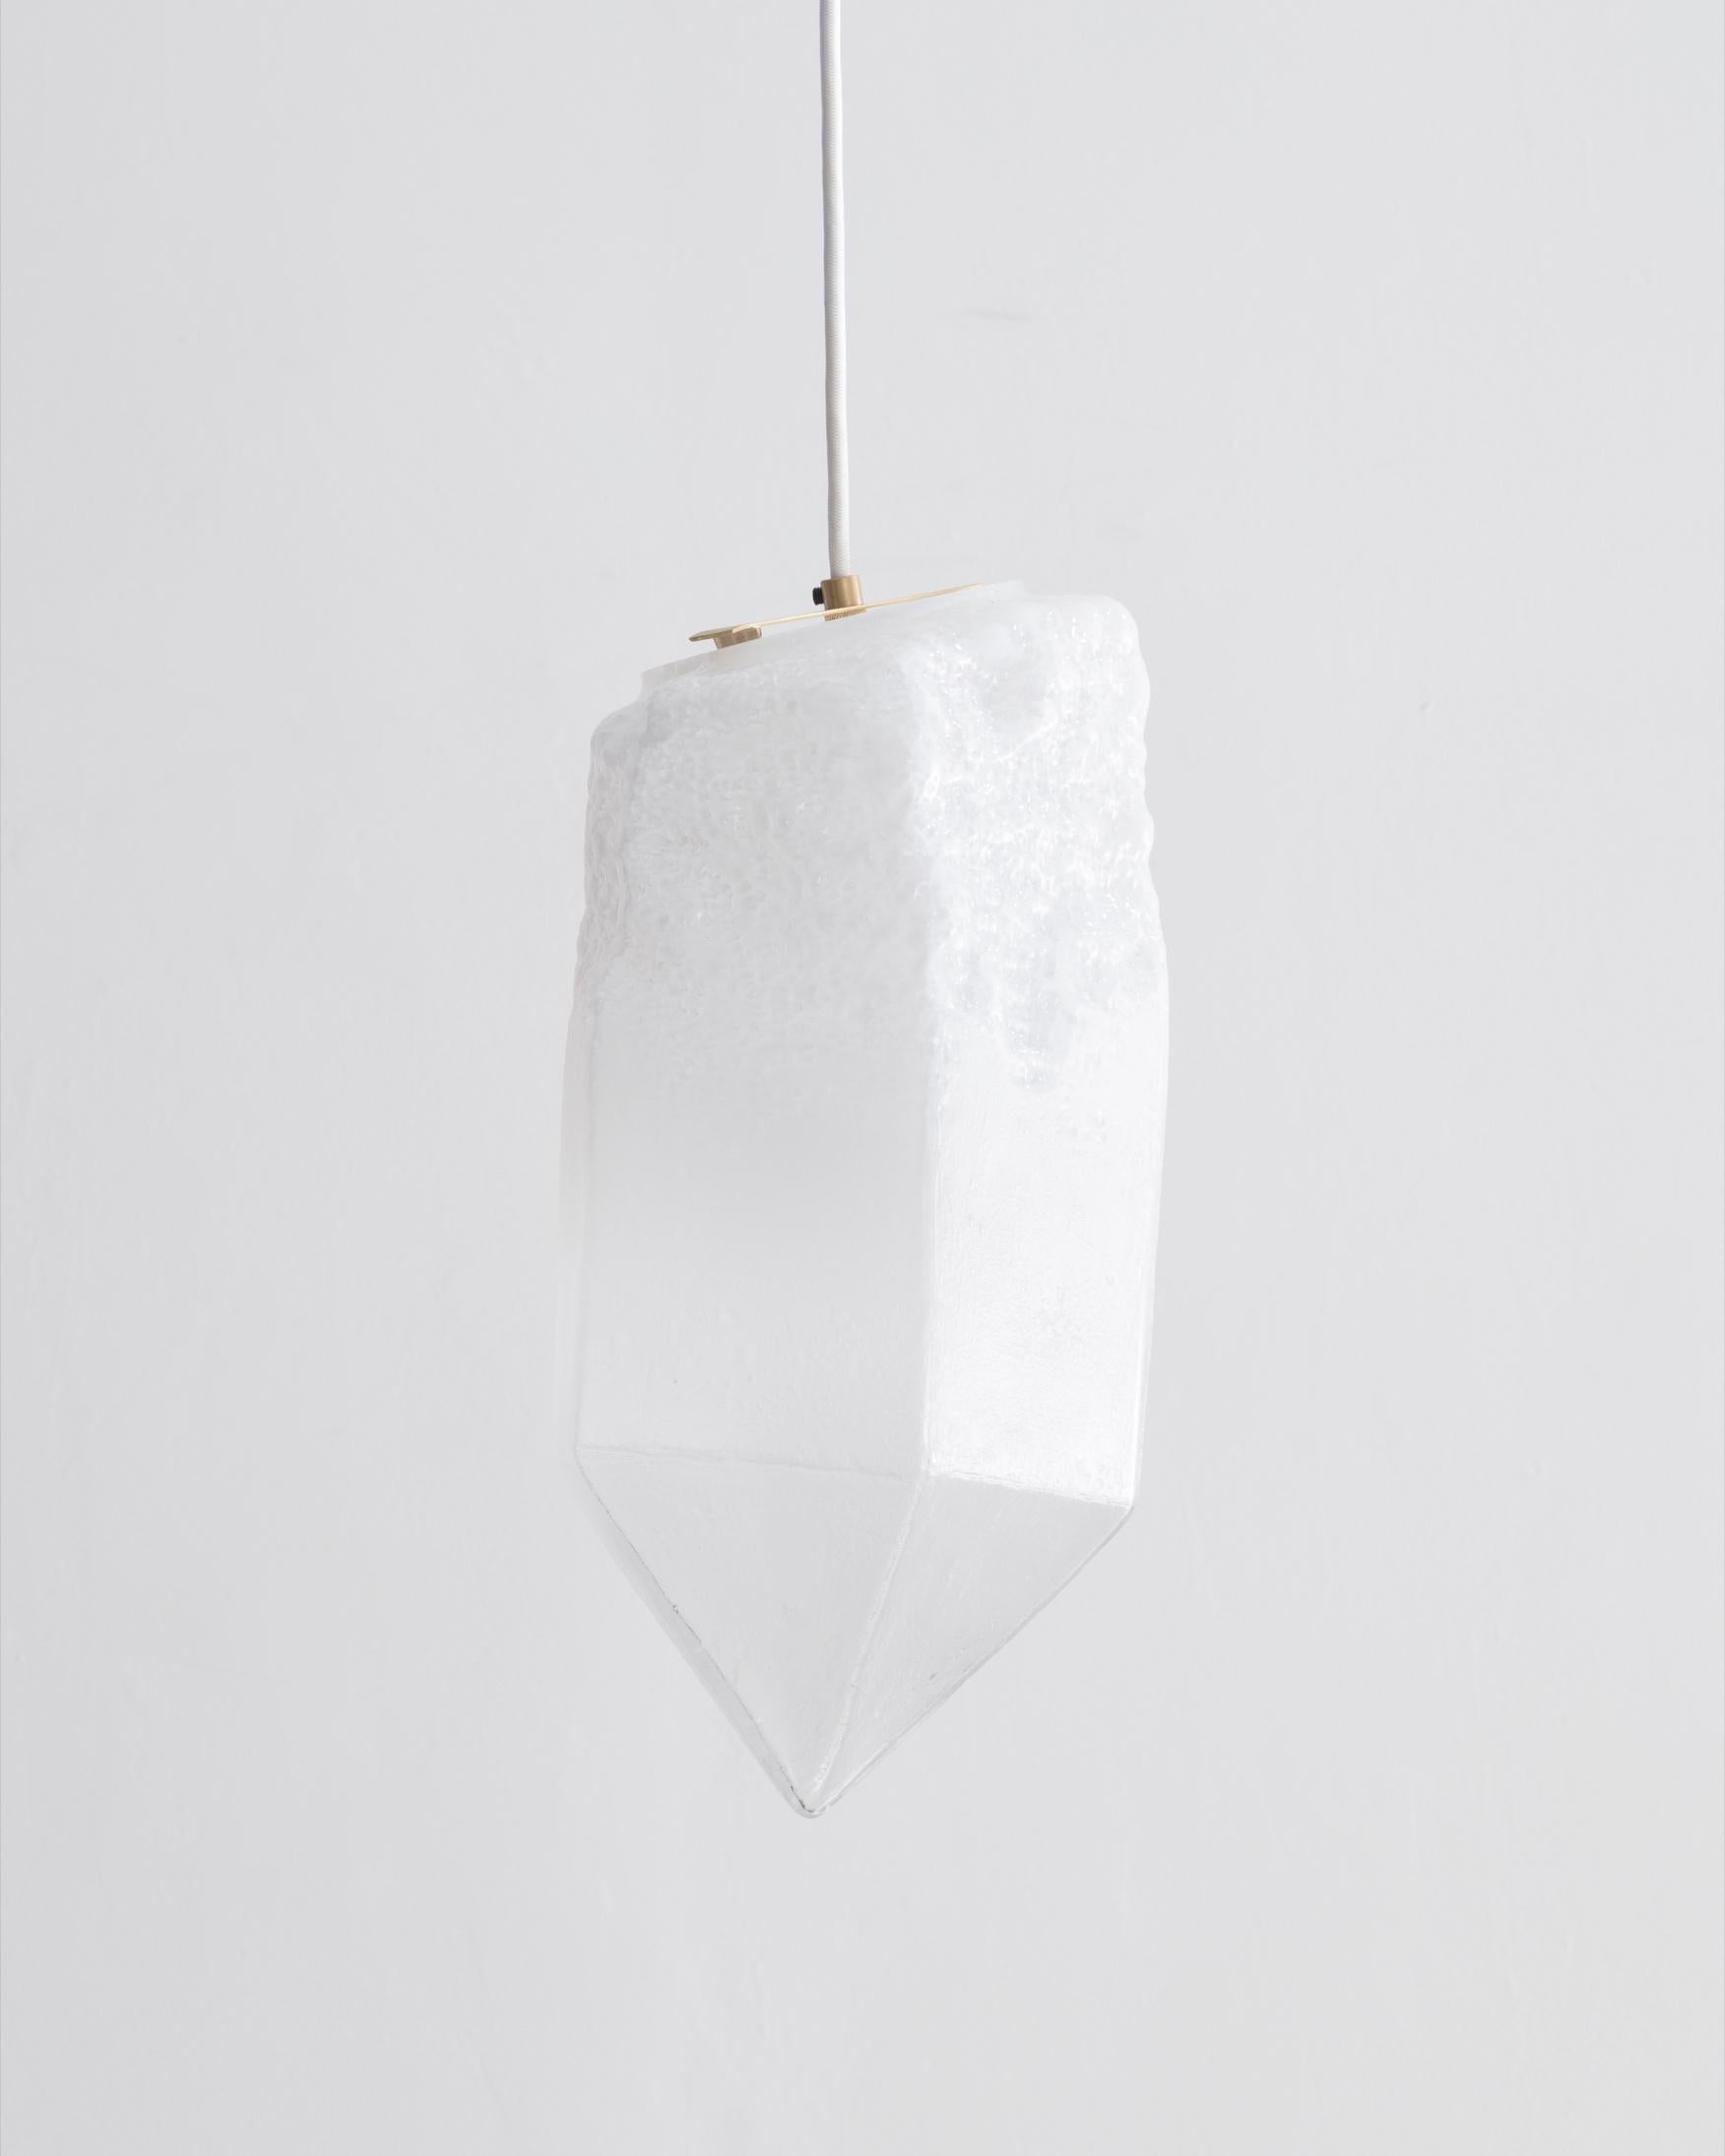 Illuminated hand blown white glass crystal pendant. Designed and made by Jeff Zimmerman, USA, 2017.
 